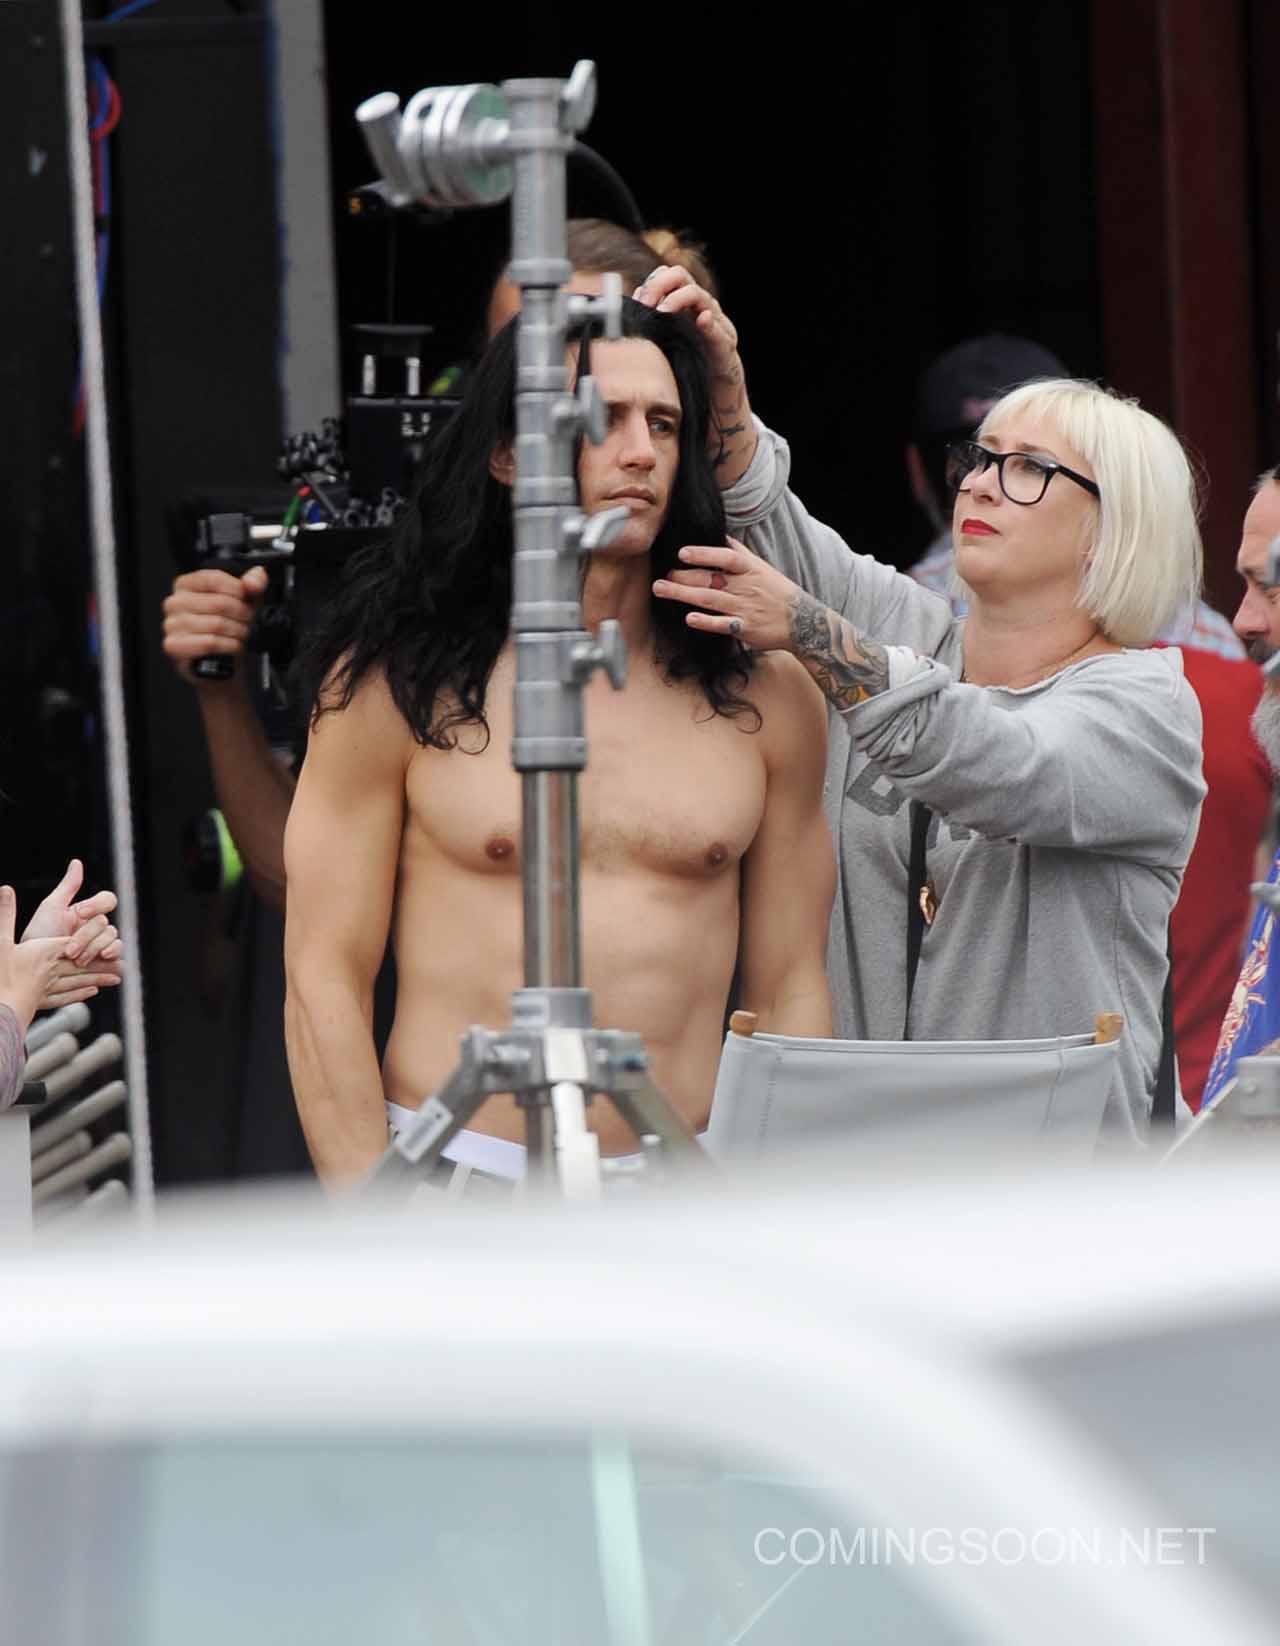 James Franco shows off his ripped abs for "The Disaster Artist"